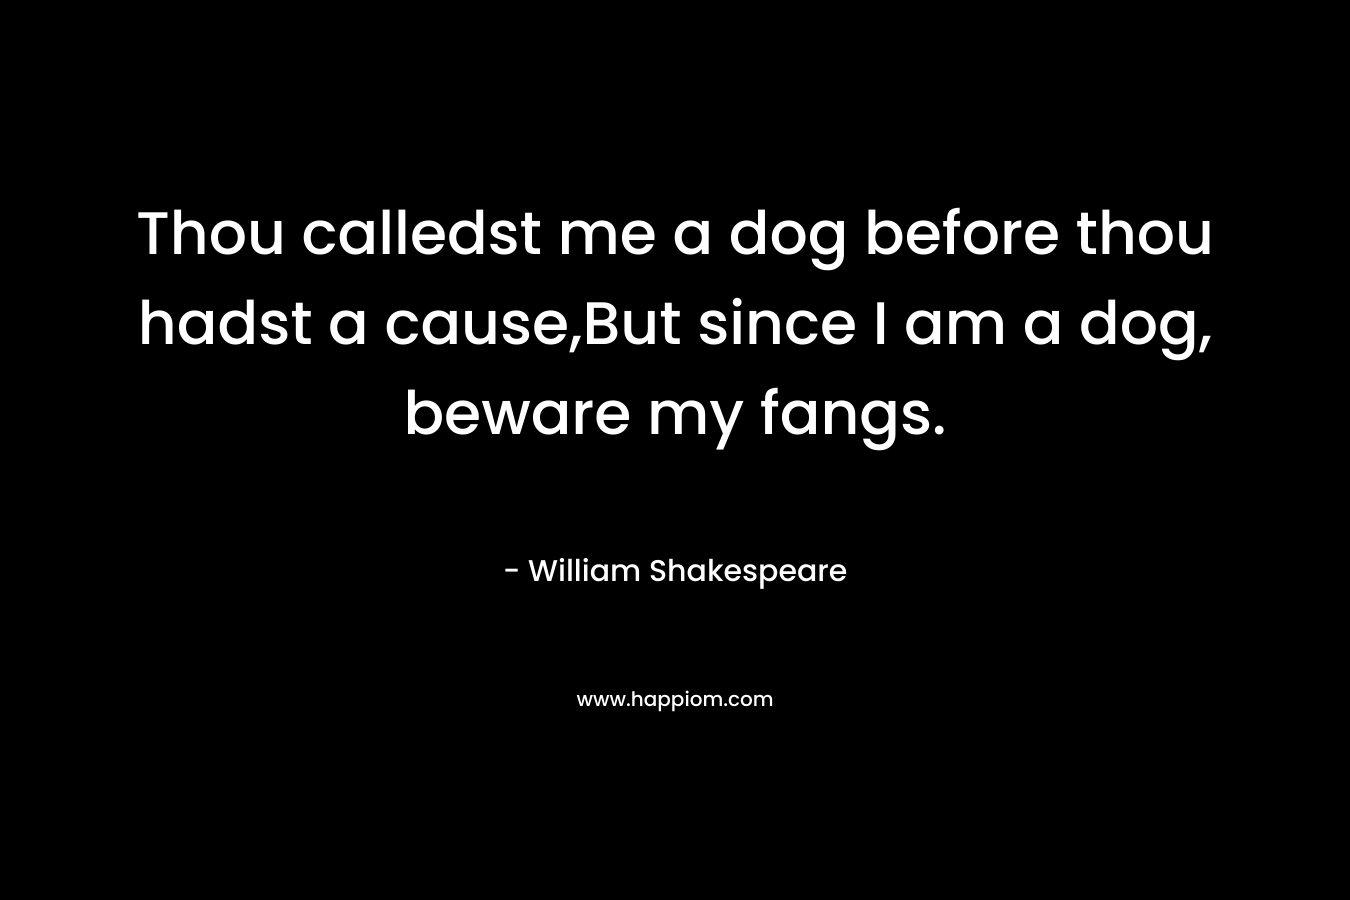 Thou calledst me a dog before thou hadst a cause,But since I am a dog, beware my fangs.